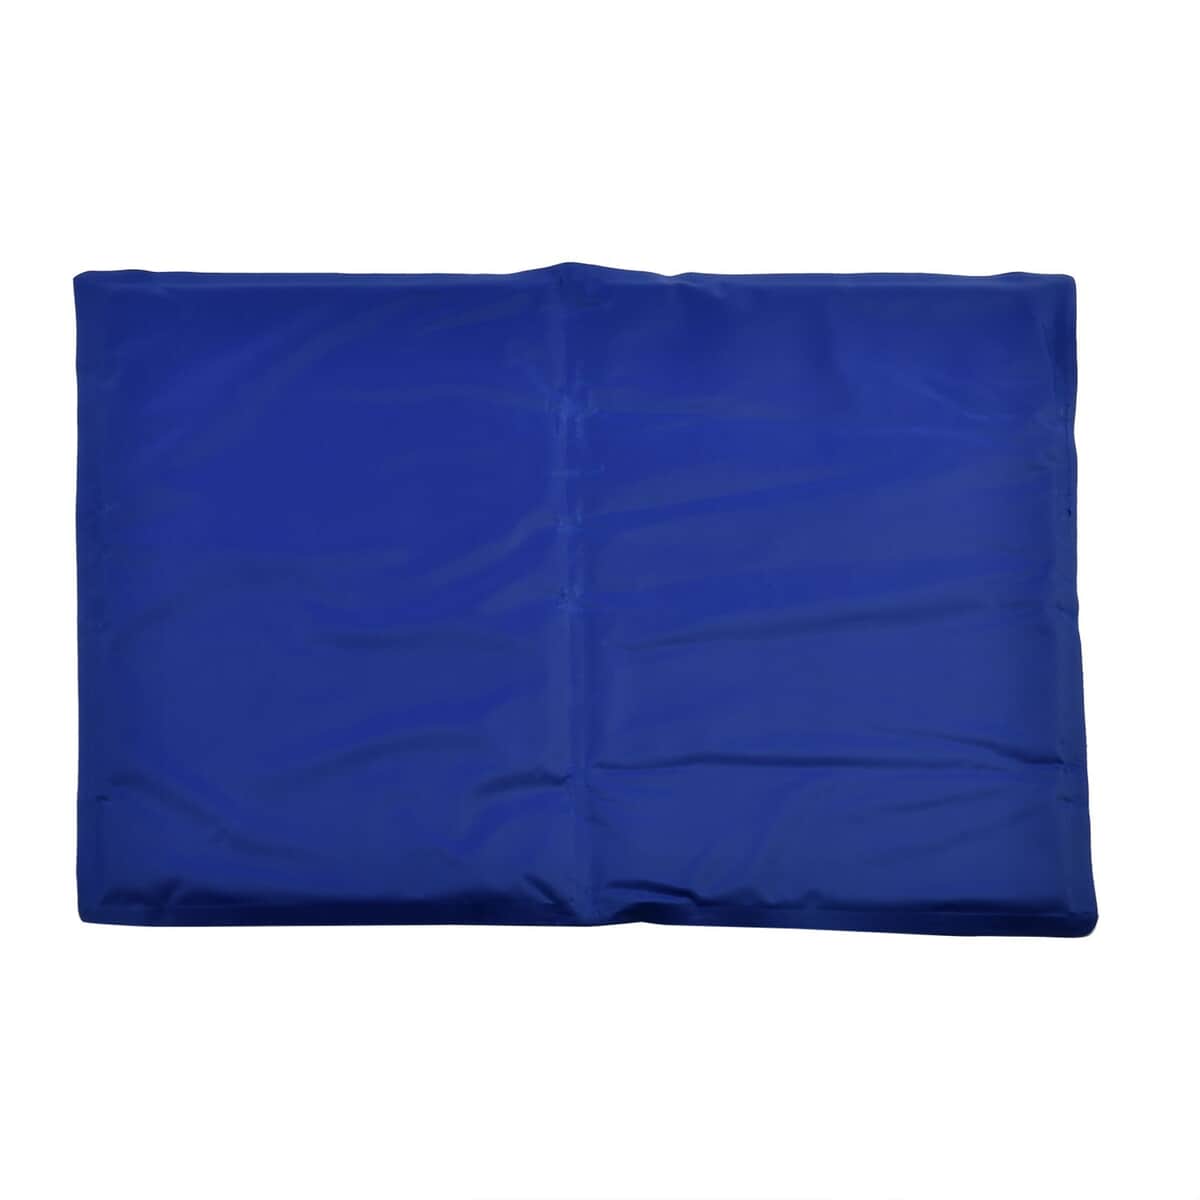 Homesmart Blue Pillow Cooling Gel Insert for all Pillows image number 0